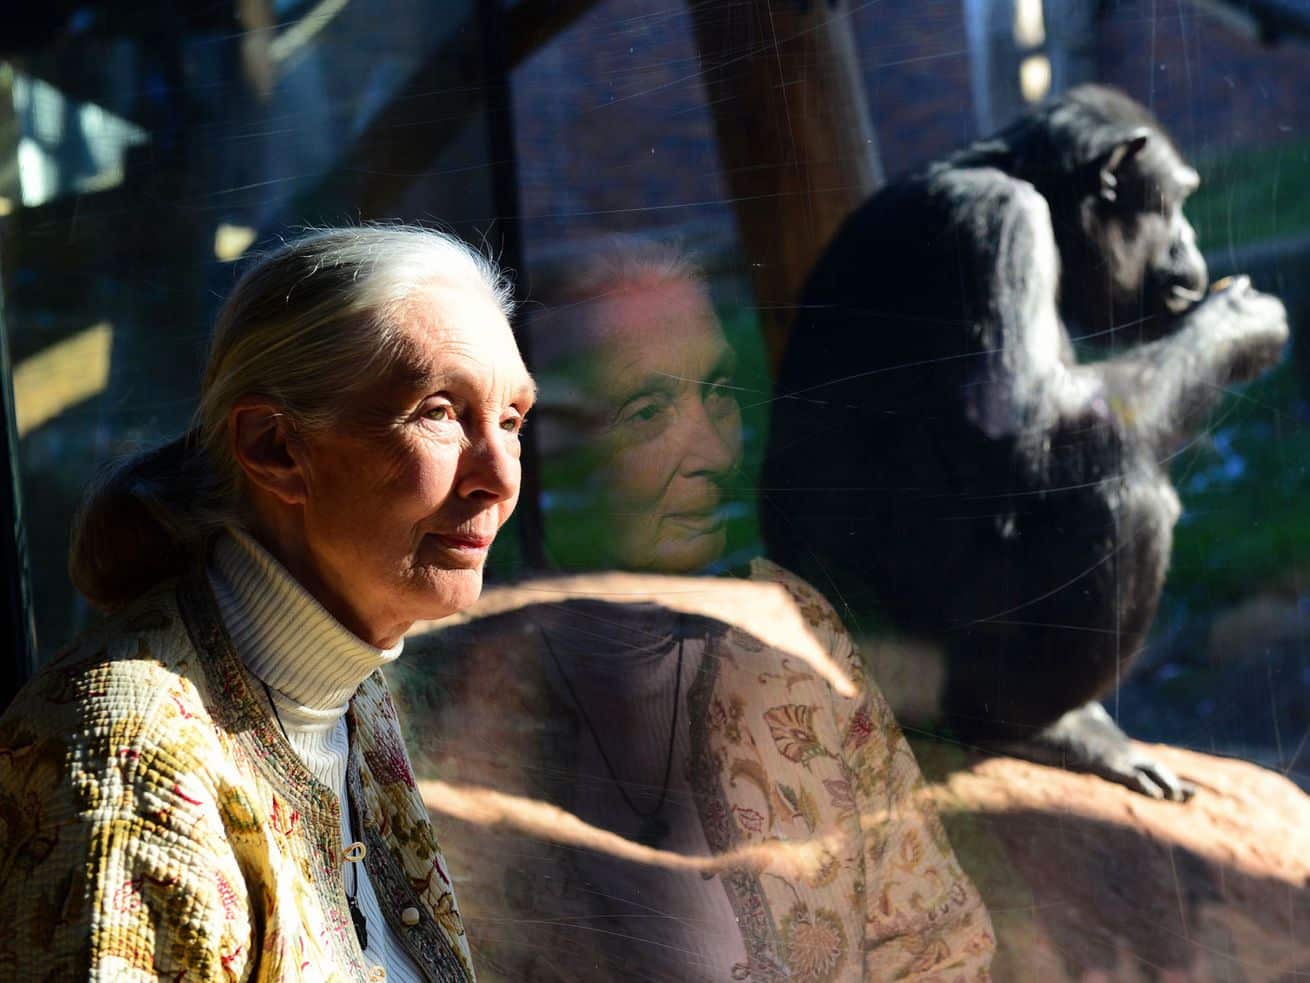 Jane Goodall reveals what studying chimpanzees teaches us about human nature